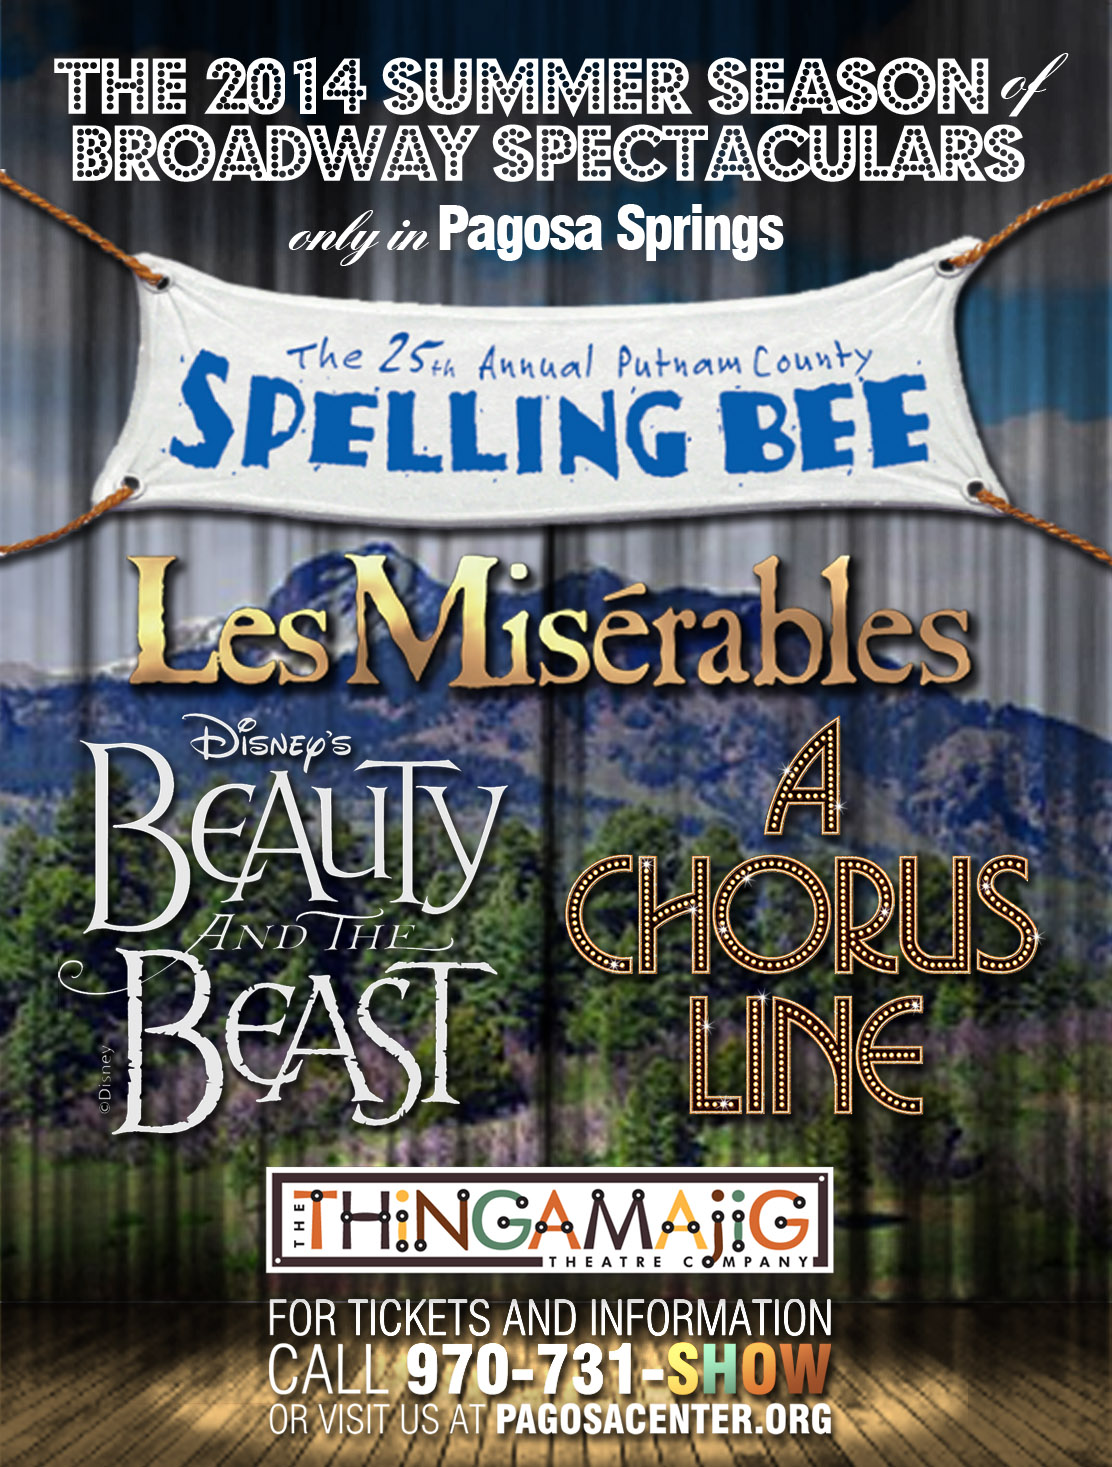 Thingamajig Theatre Company and Pagosa Springs Center for the Arts are happy to announce their 2014 Summer Season, bringing professional theatre to the Four Corners region in Colorado.